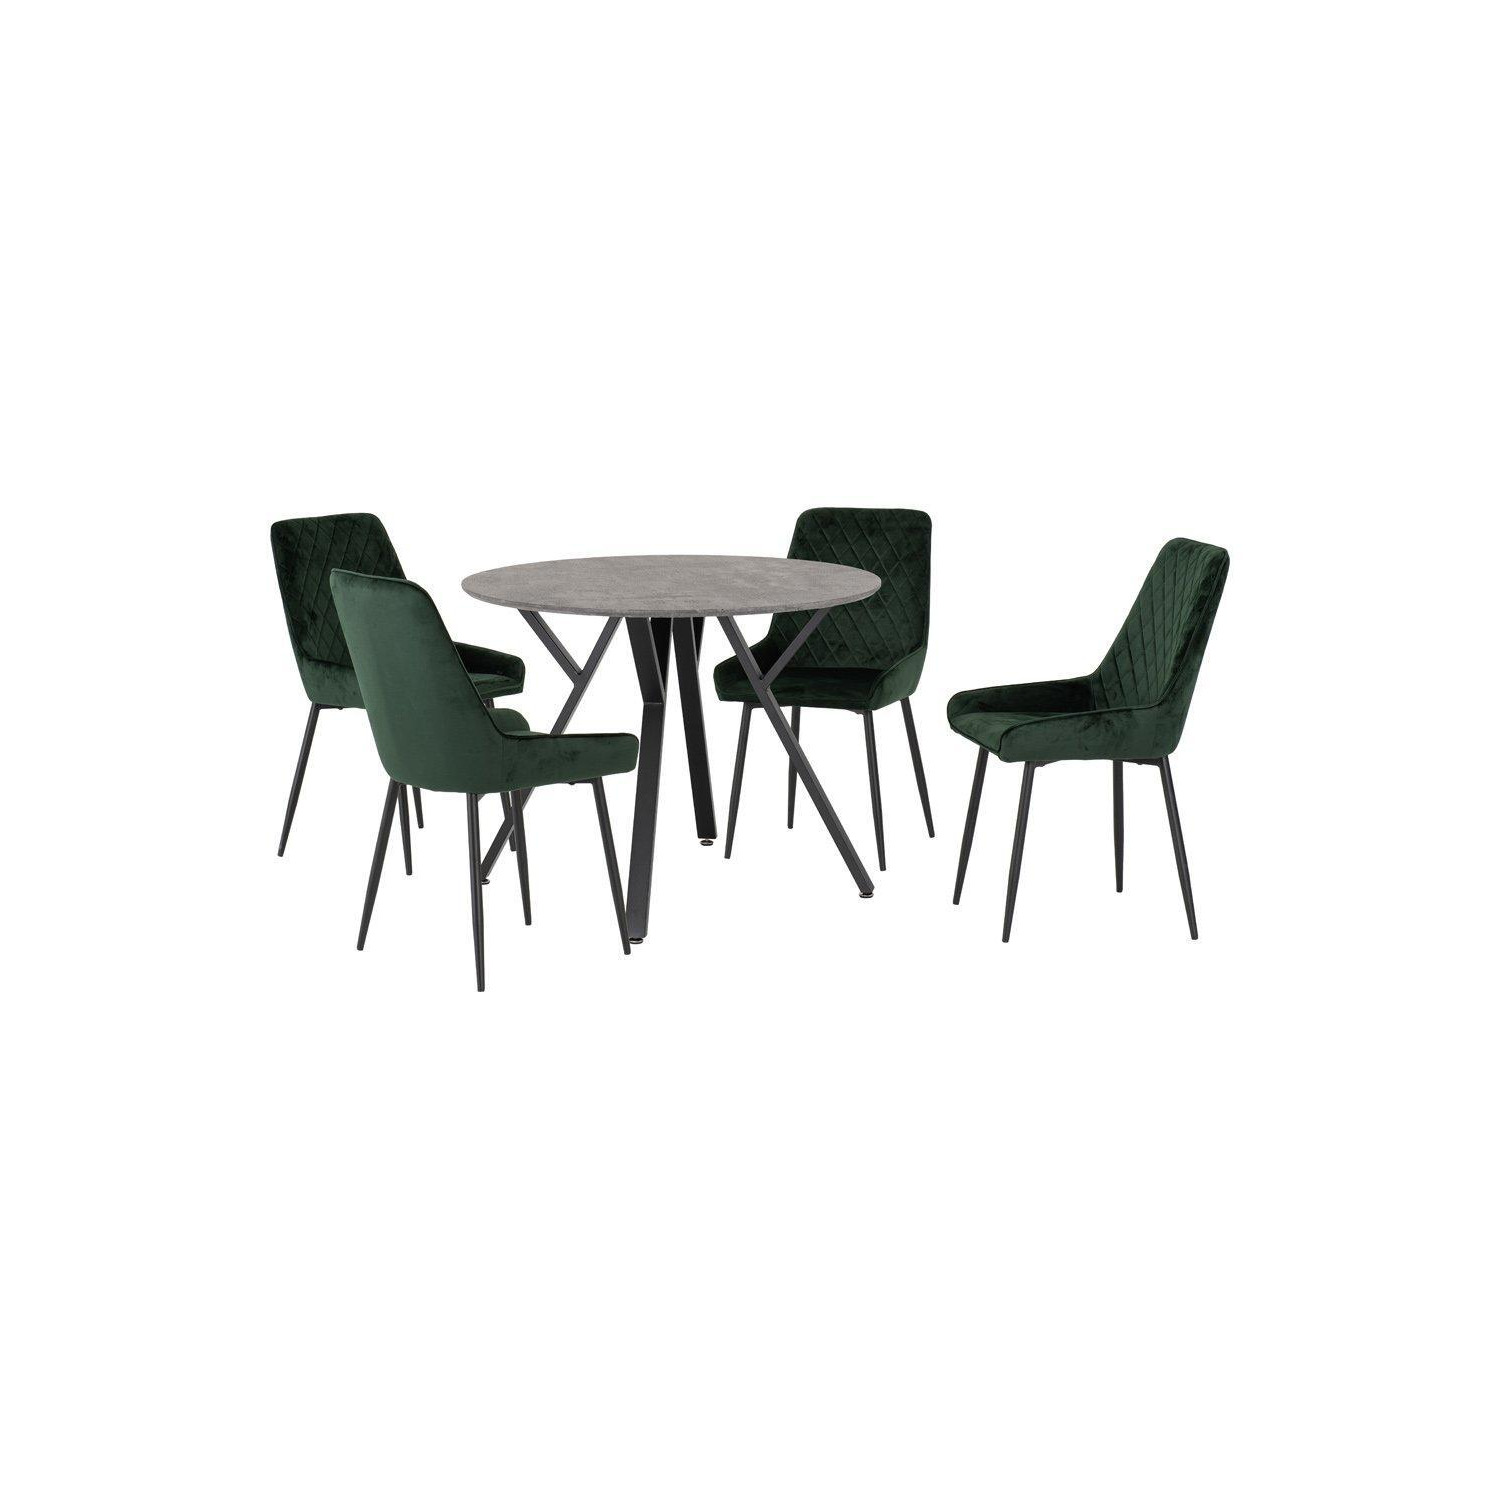 Athens Round Dining Set with Avery Chairs - image 1